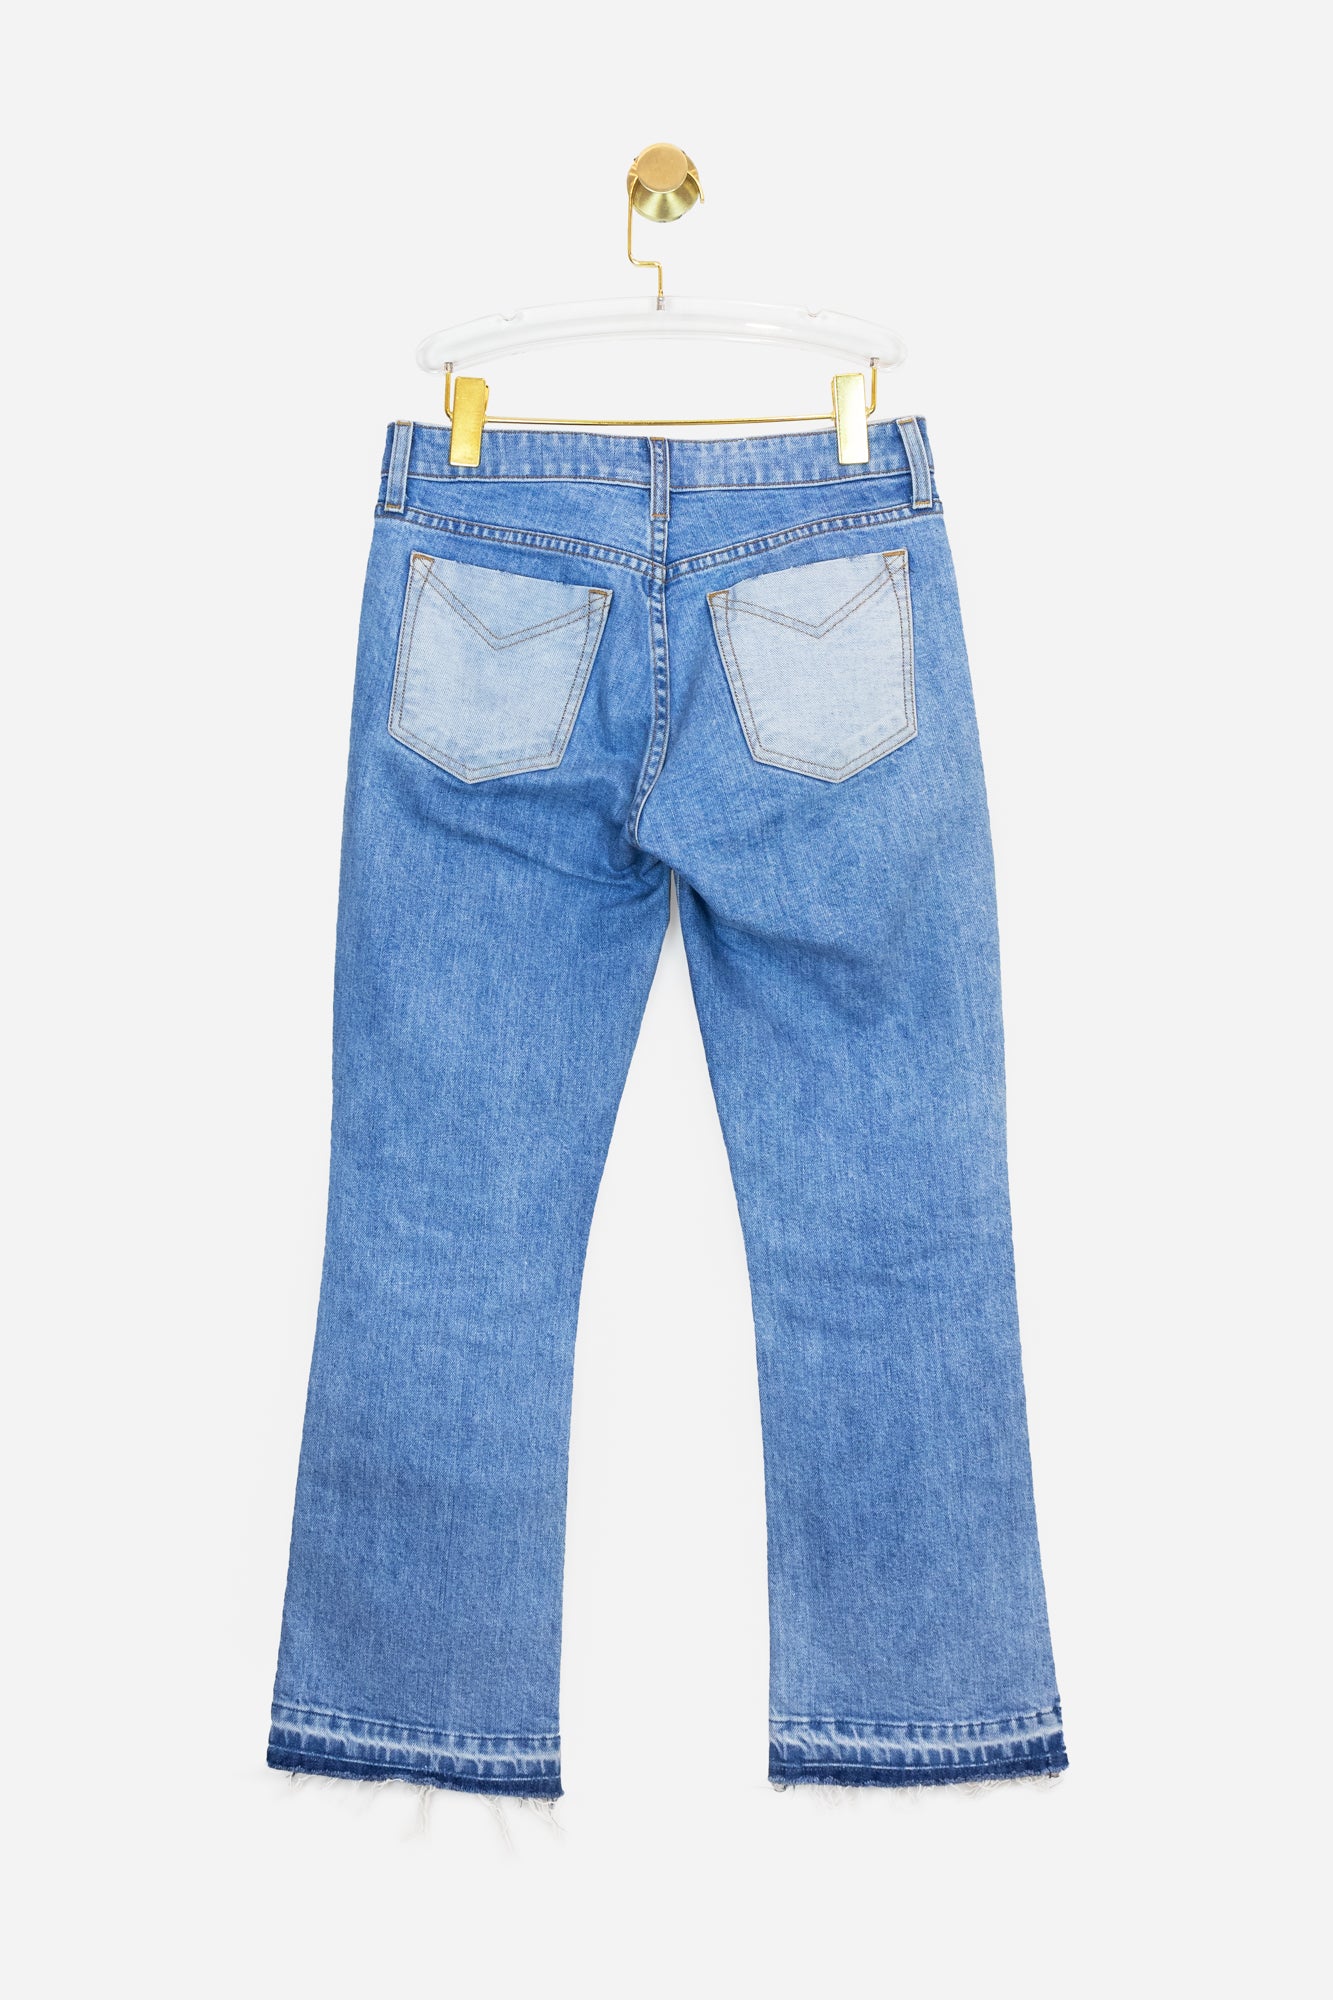 Two-Tone Denim with Distressed Bottoms